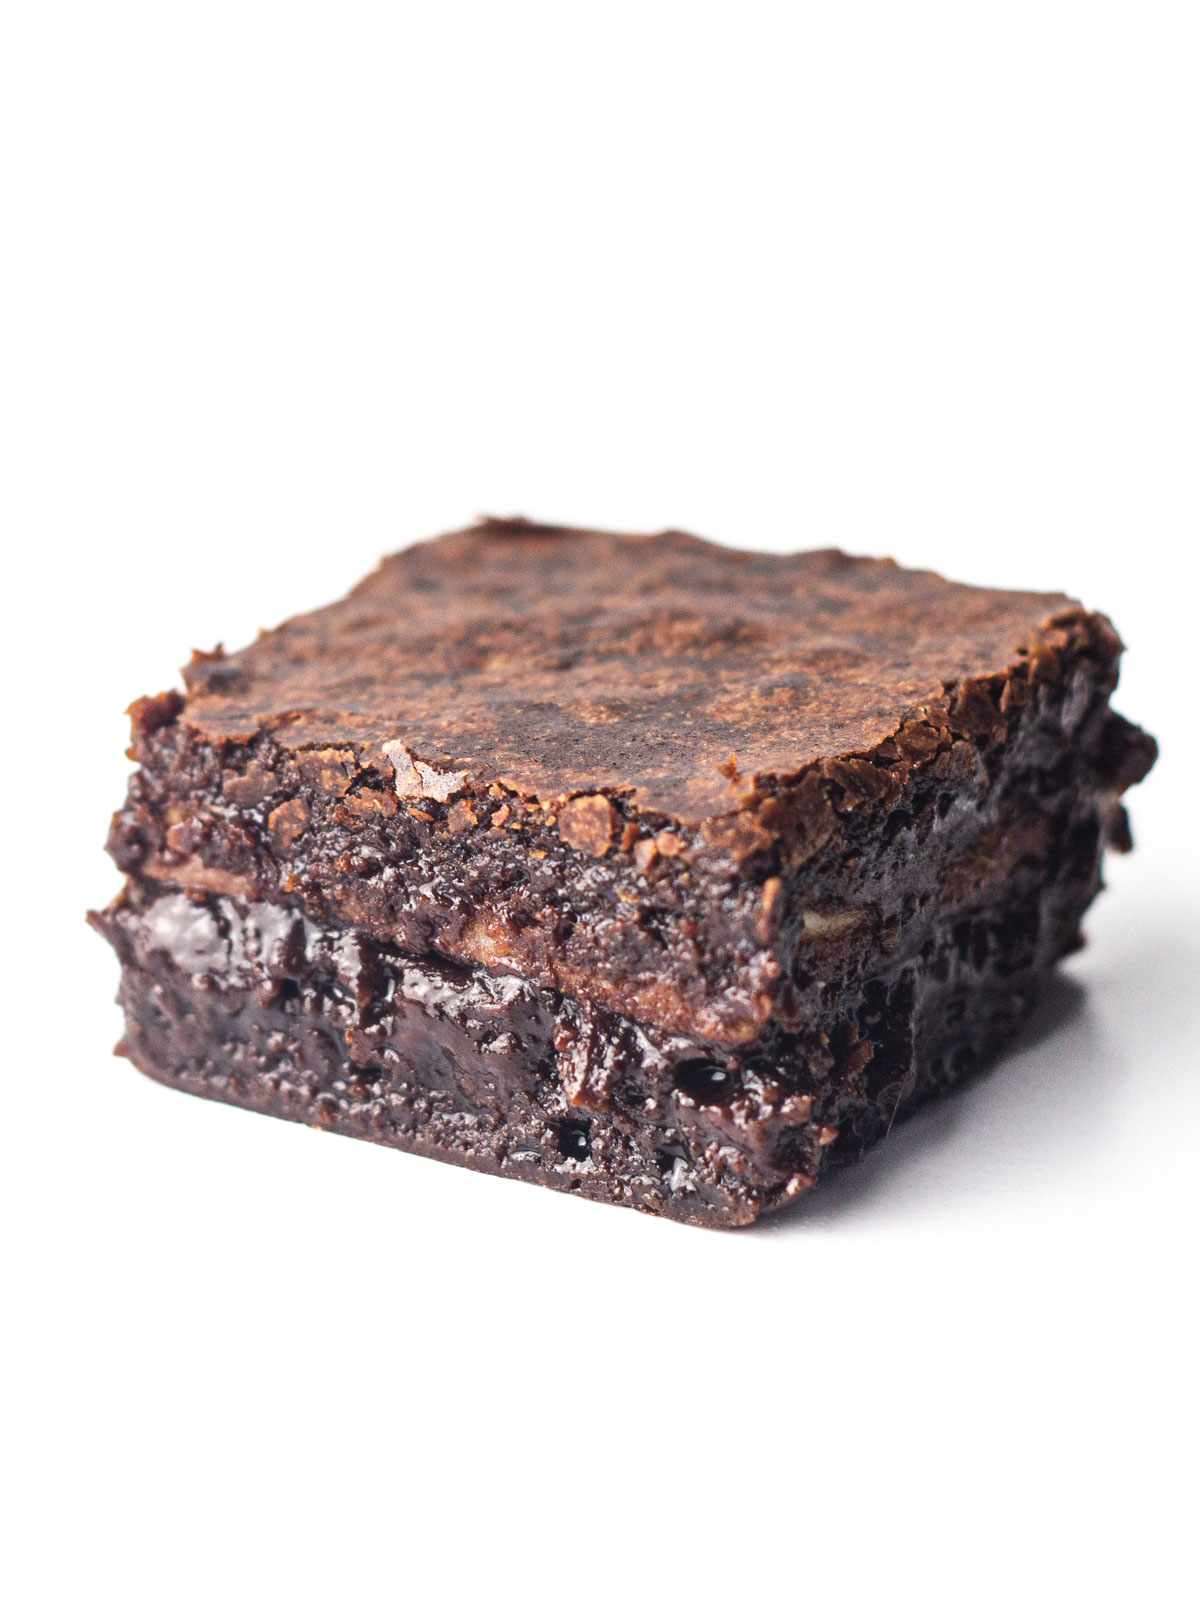 A single peppermint mocha brownie where the layer of peppermint bark is barely visible due to the fudgy chocolate interior of the brownie.